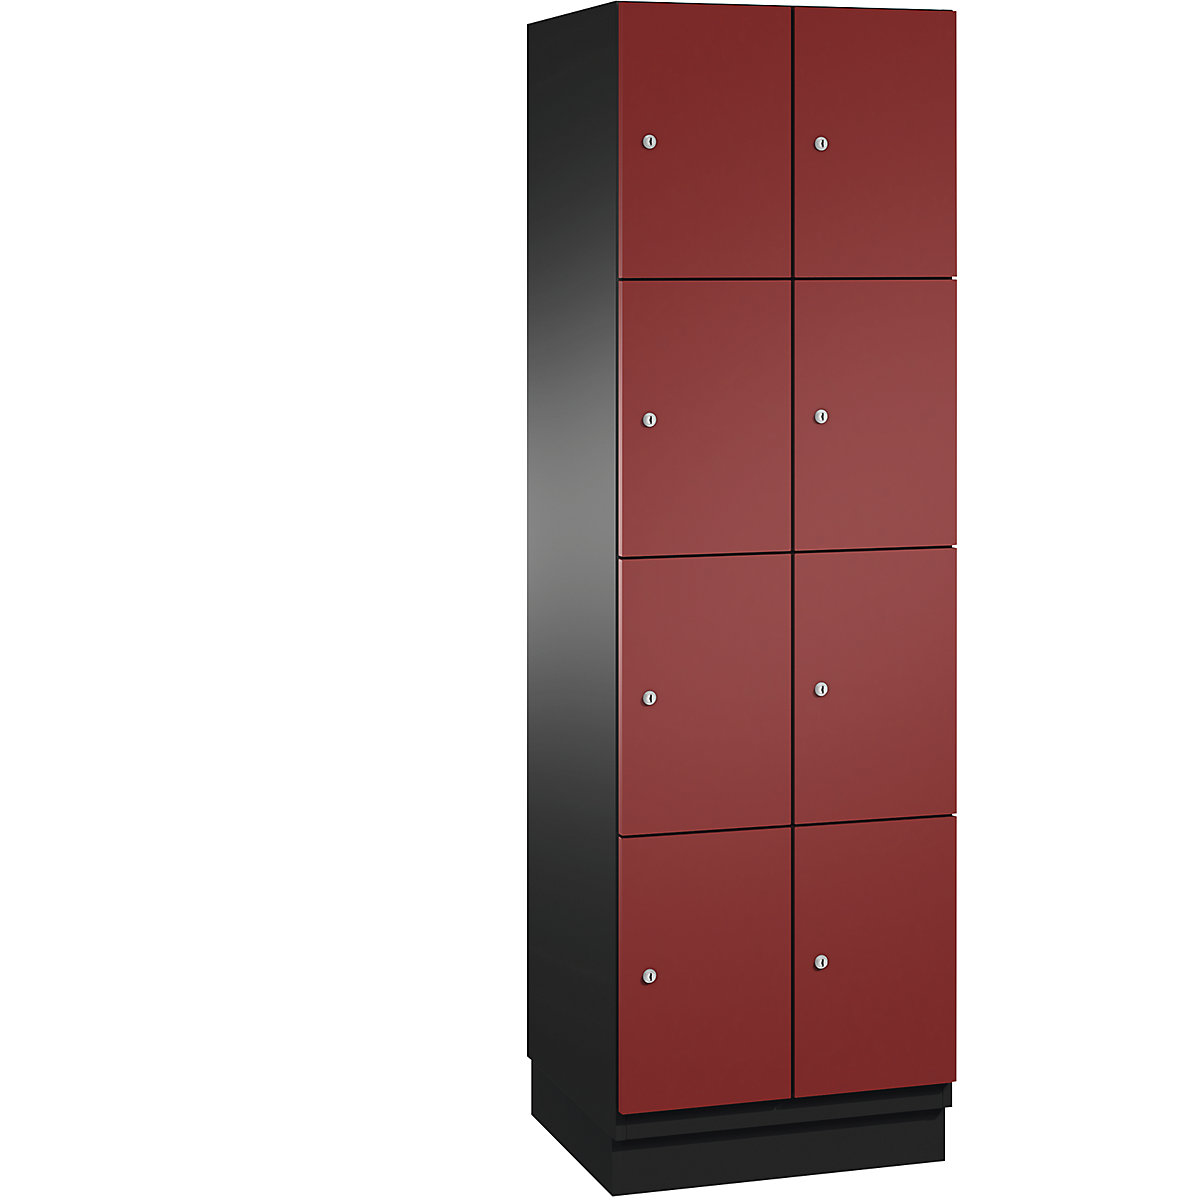 CAMBIO compartment locker with sheet steel doors – C+P, 8 compartments, width 600 mm, body black grey / door ruby red-7